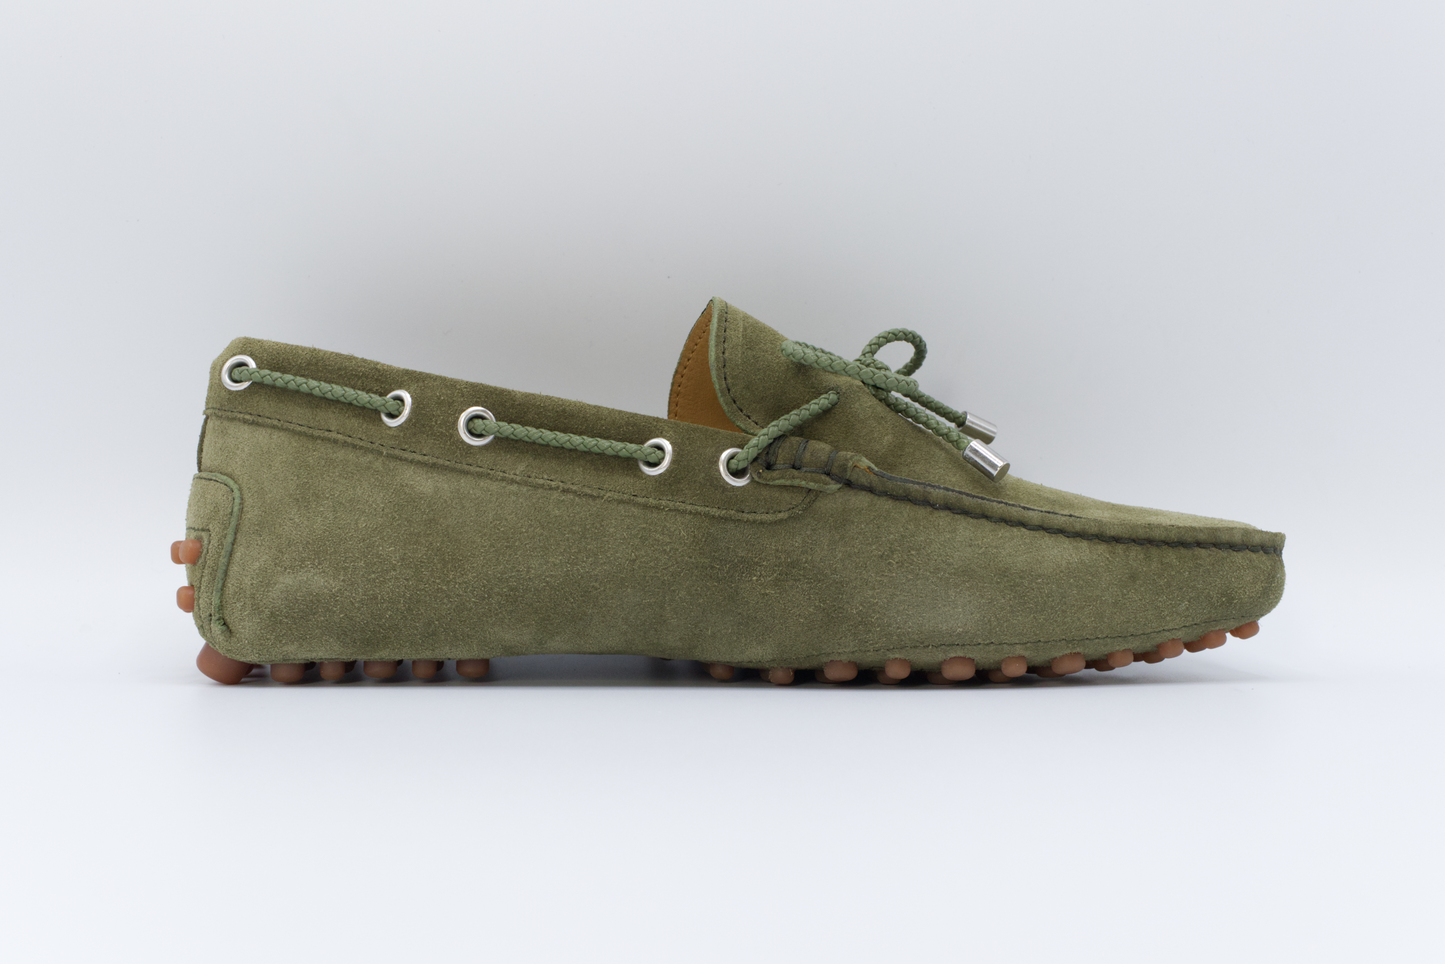 Shop Handmade Men's Calf Leather Suede Loafer in Light Green or browse our range of hand-made Italian sneakers for men in leather or suede. We deliver to the USA and Canada & offer multiple payment plans as well as accept multiple safe & secure payment methods. Confort07